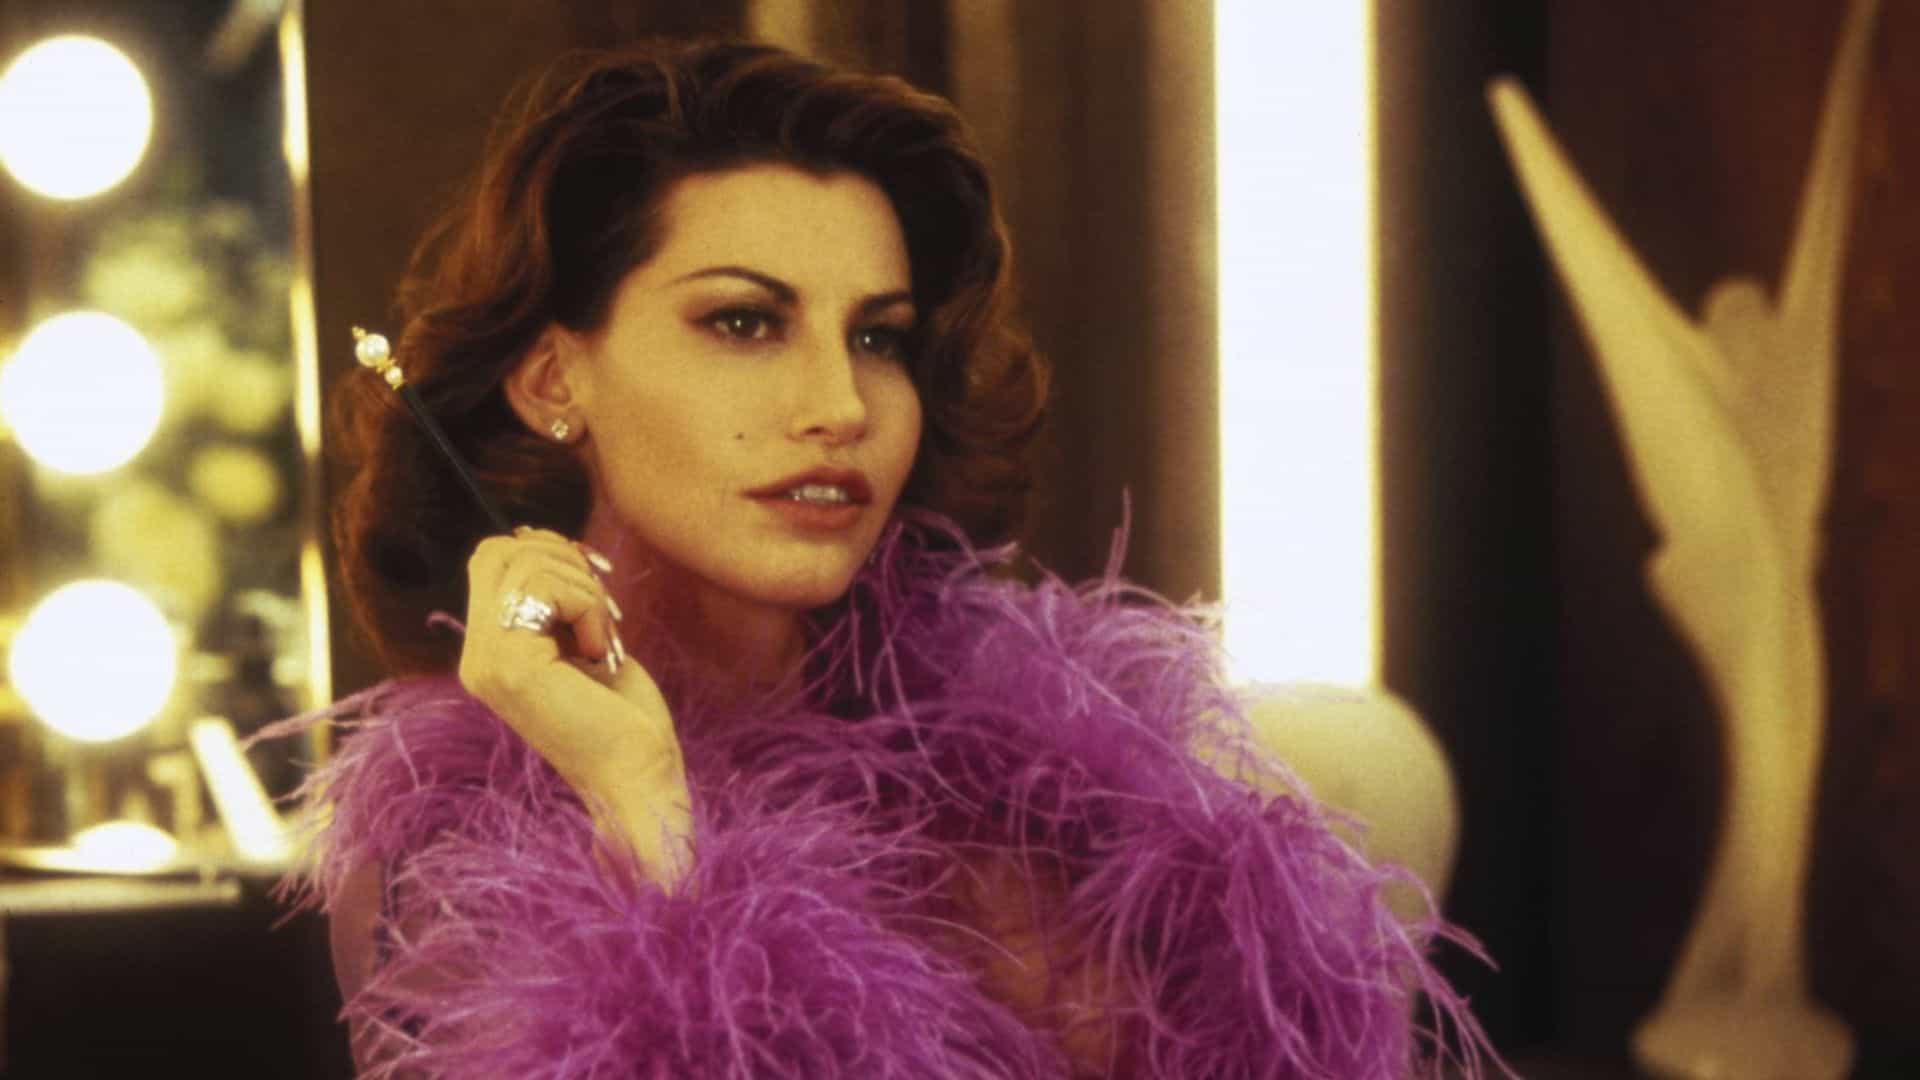 Gina Gershon in a purple robe with feathers in this image from Carolco Pictures